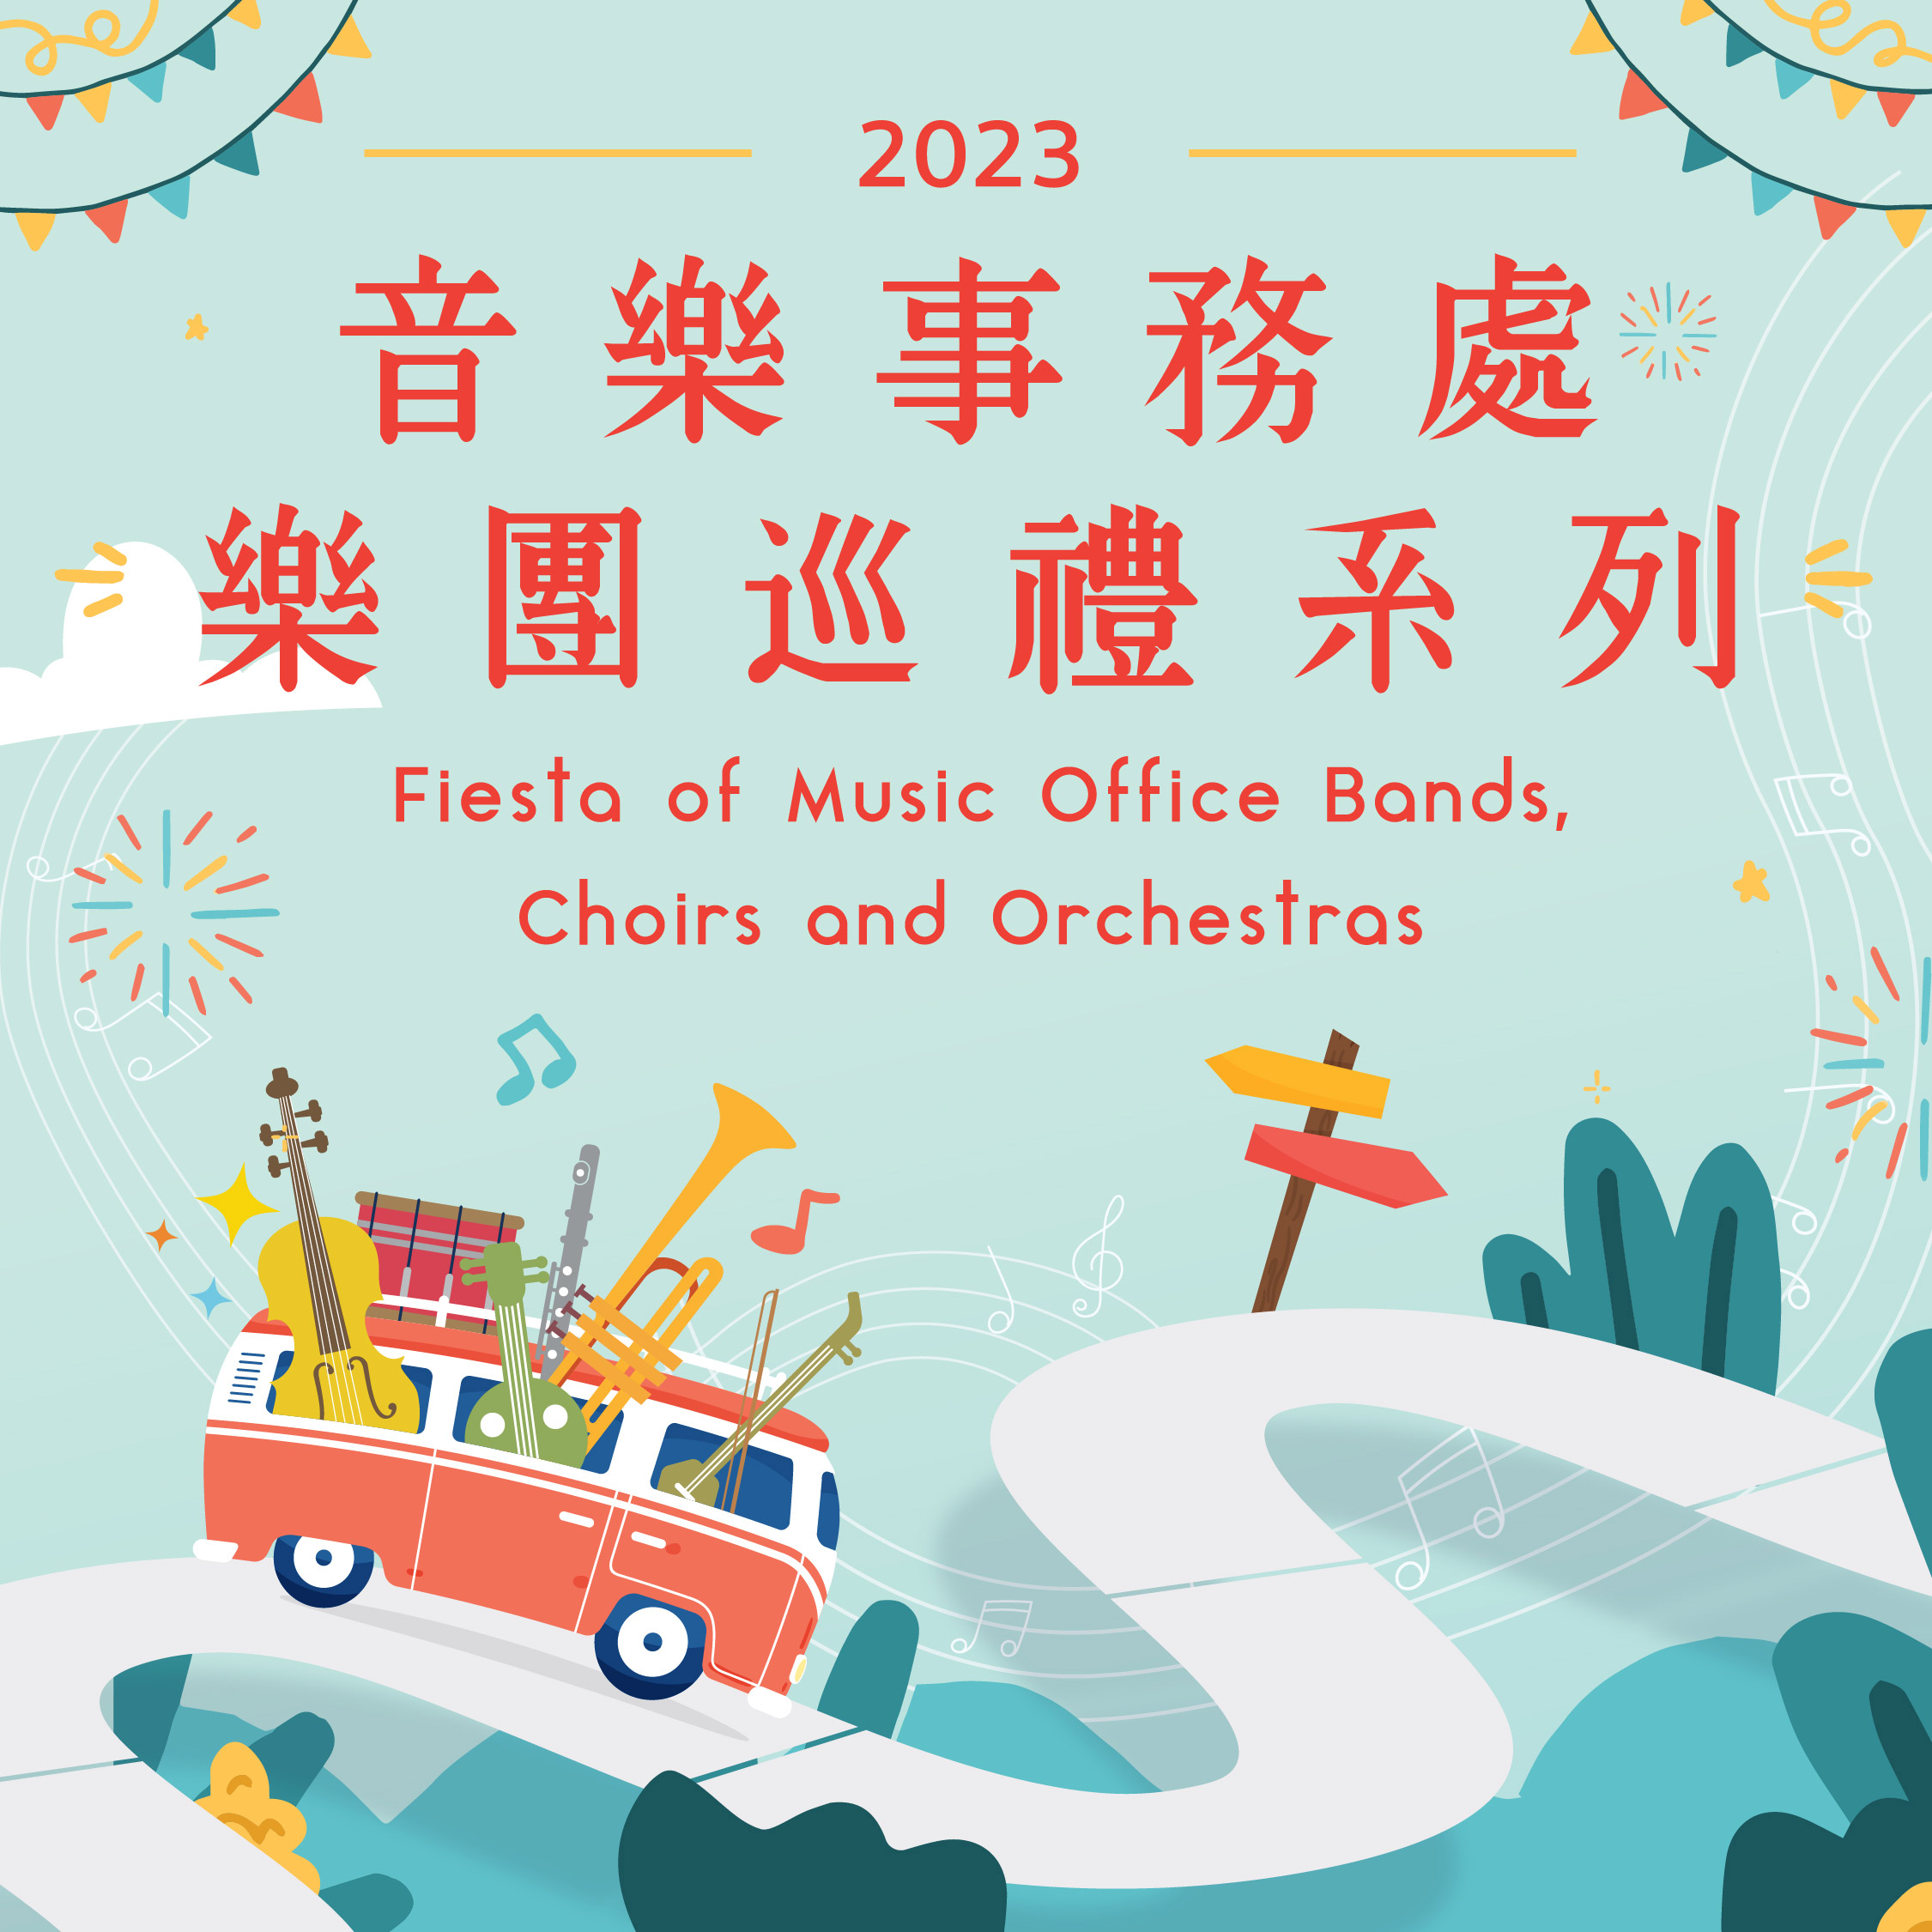 2023 Fiesta of Music Office Bands, Choirs and Orchestras